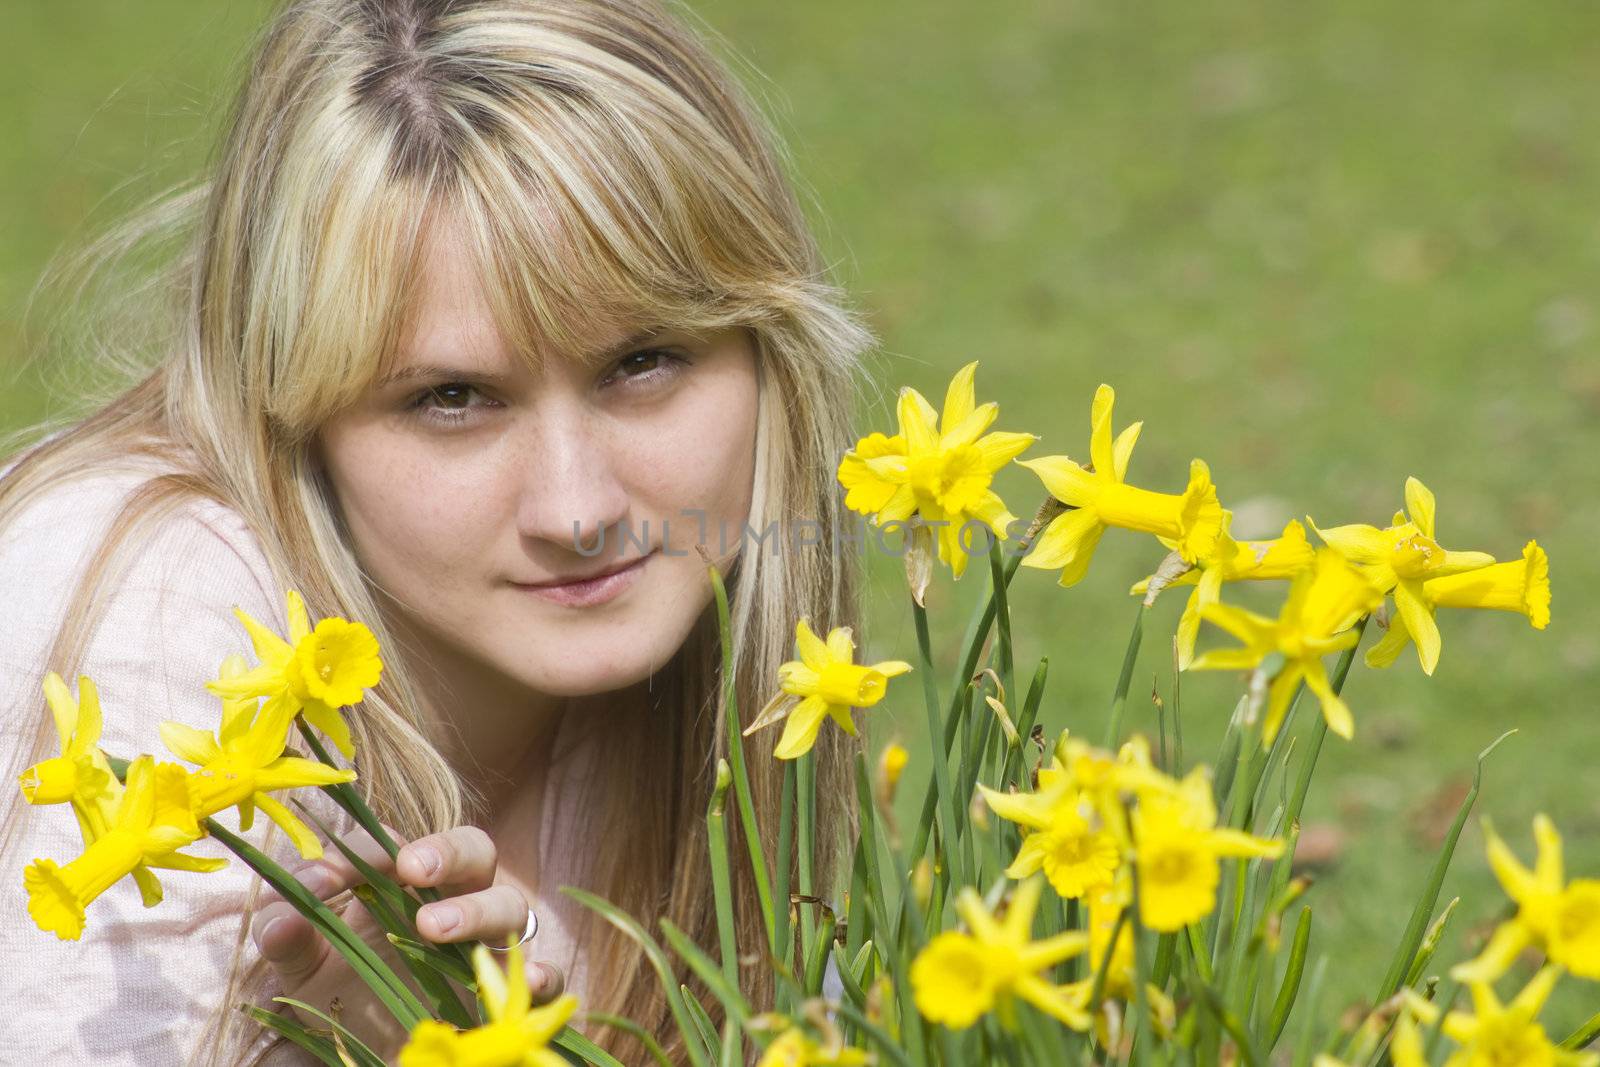 beautiful young woman with flowers on a warm spring day  by miradrozdowski